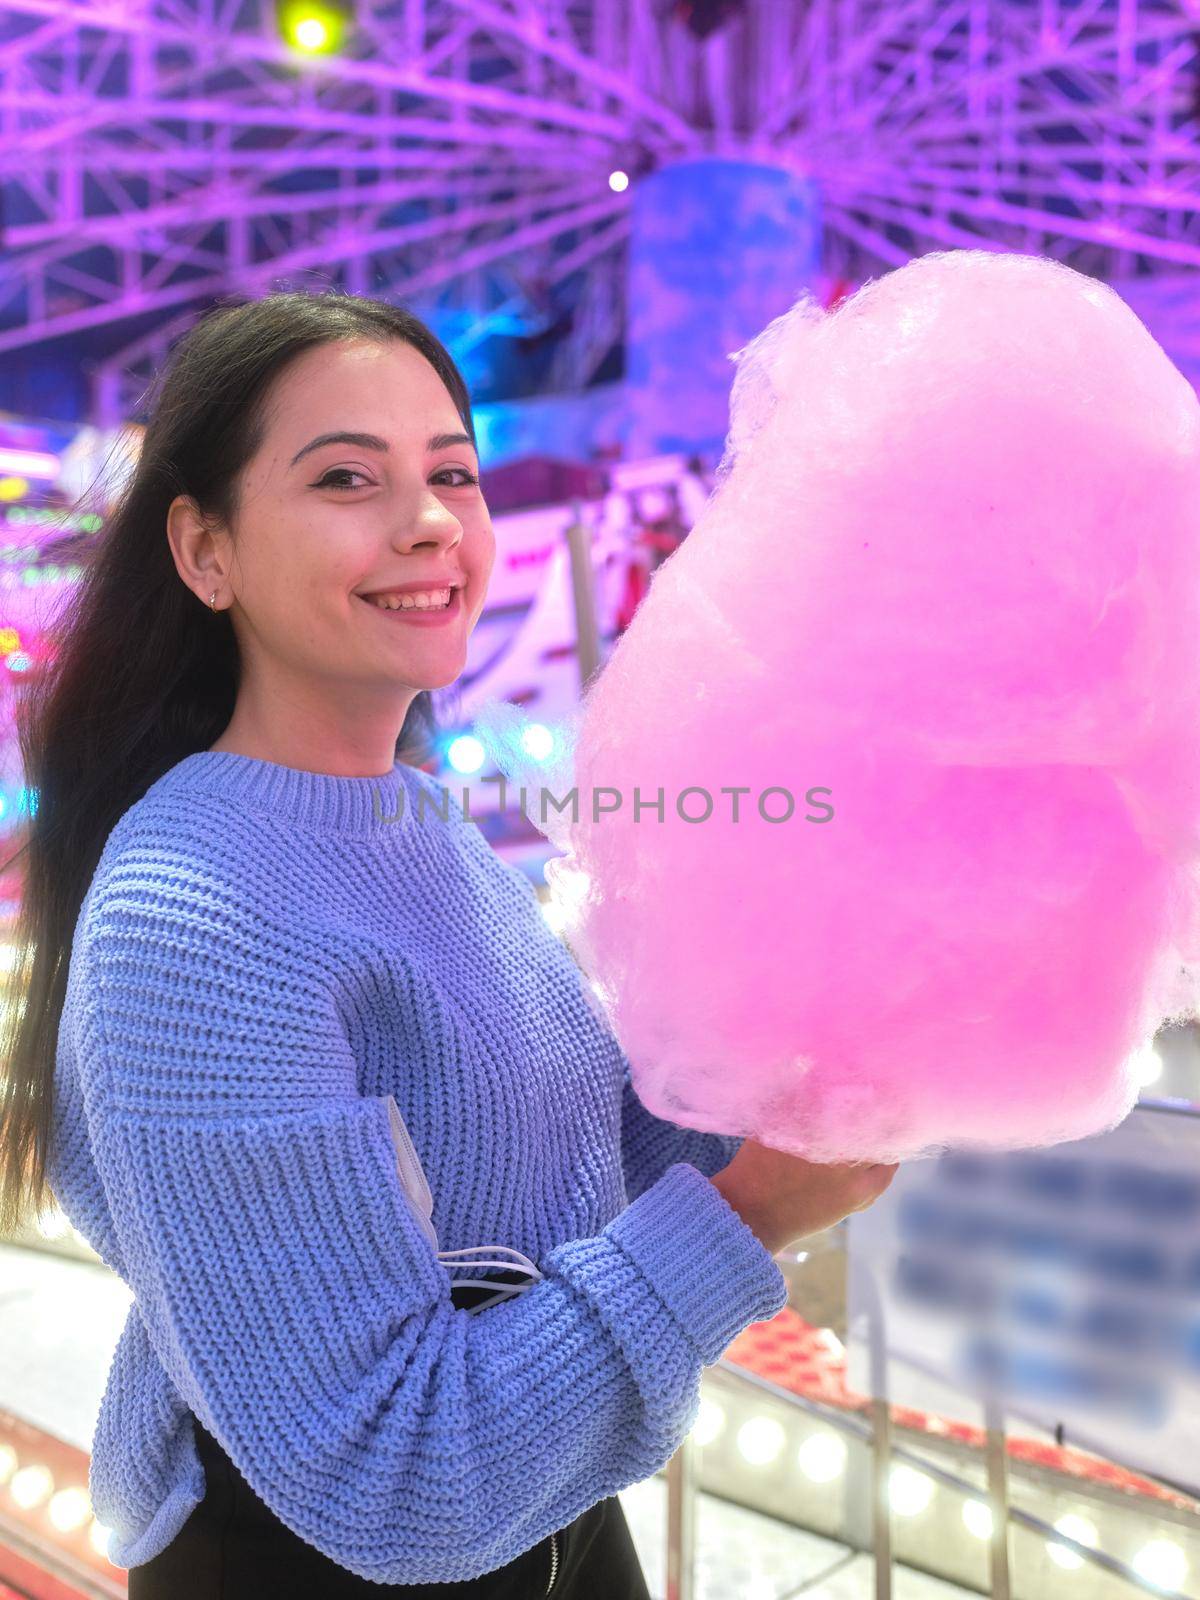 Vertical portrait of a smiling woman holding a cotton candy outdoors at night by WesternExoticStockers